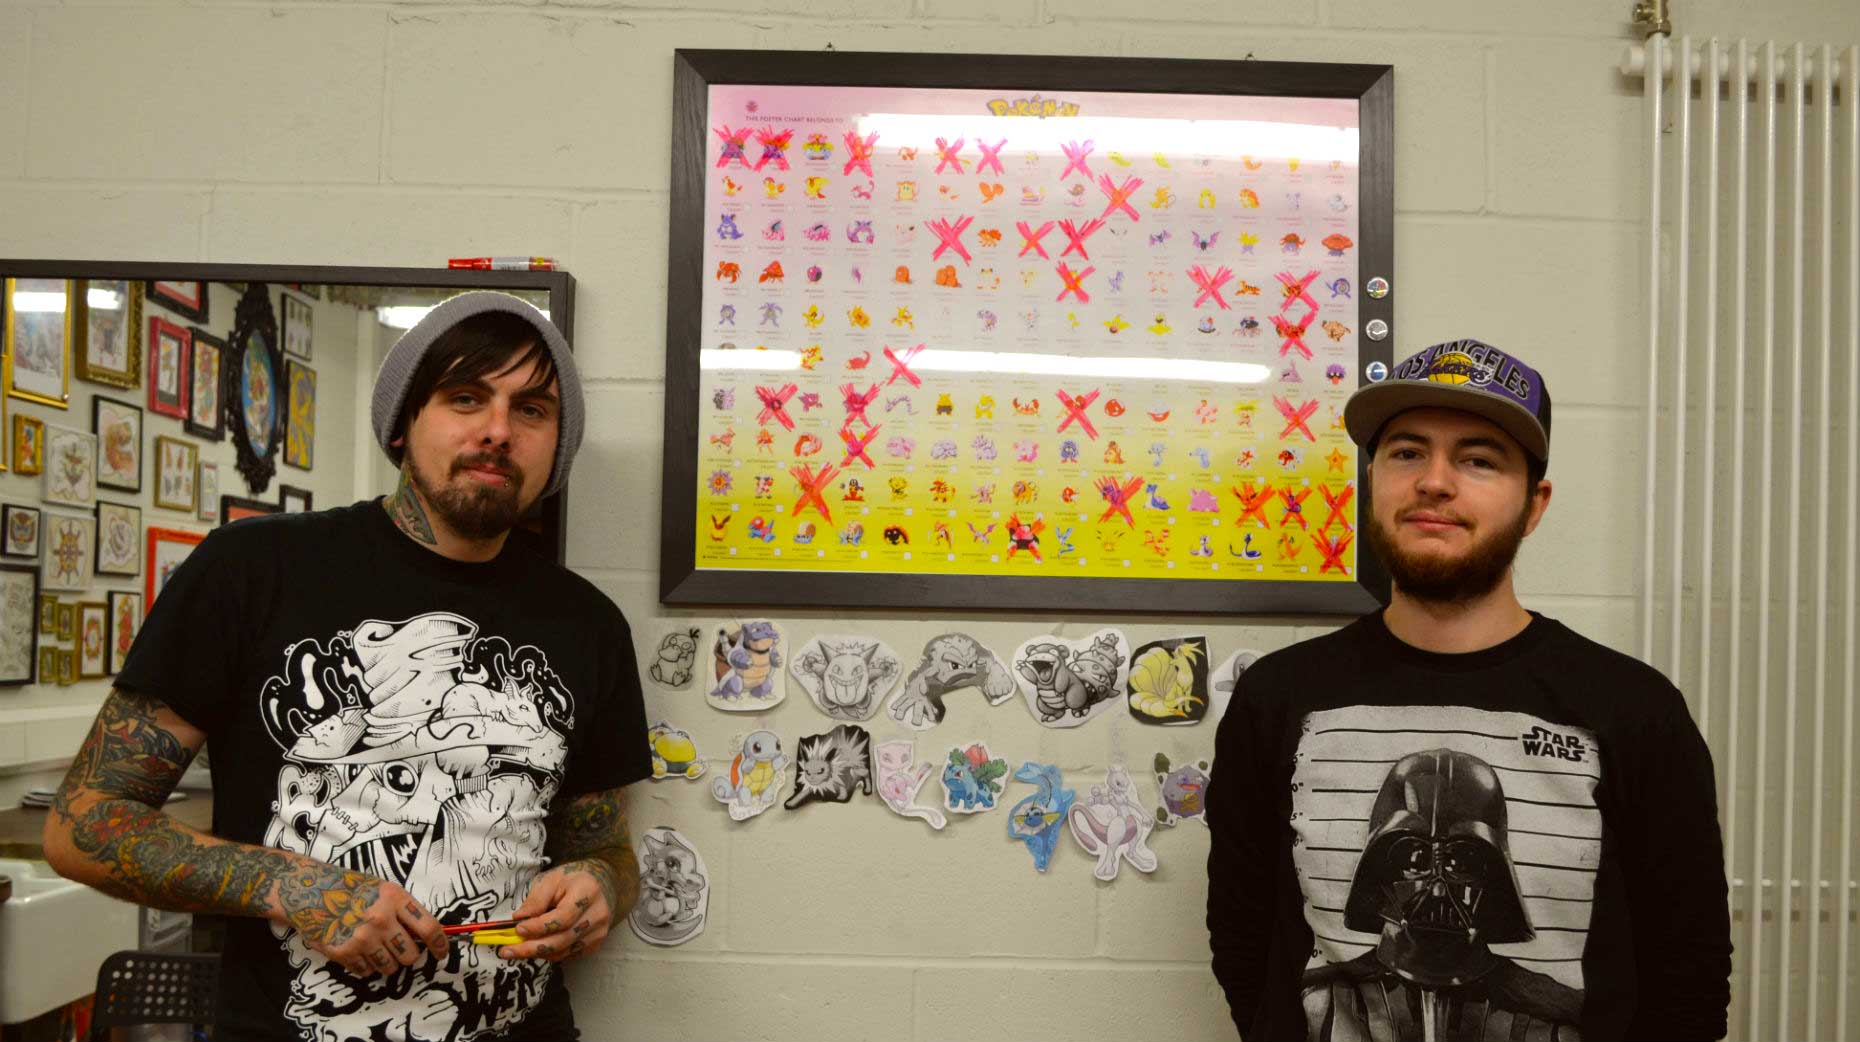 The Lincoln tattoo artists plan to tattoo all the 151 original Pokemon characters for charity.